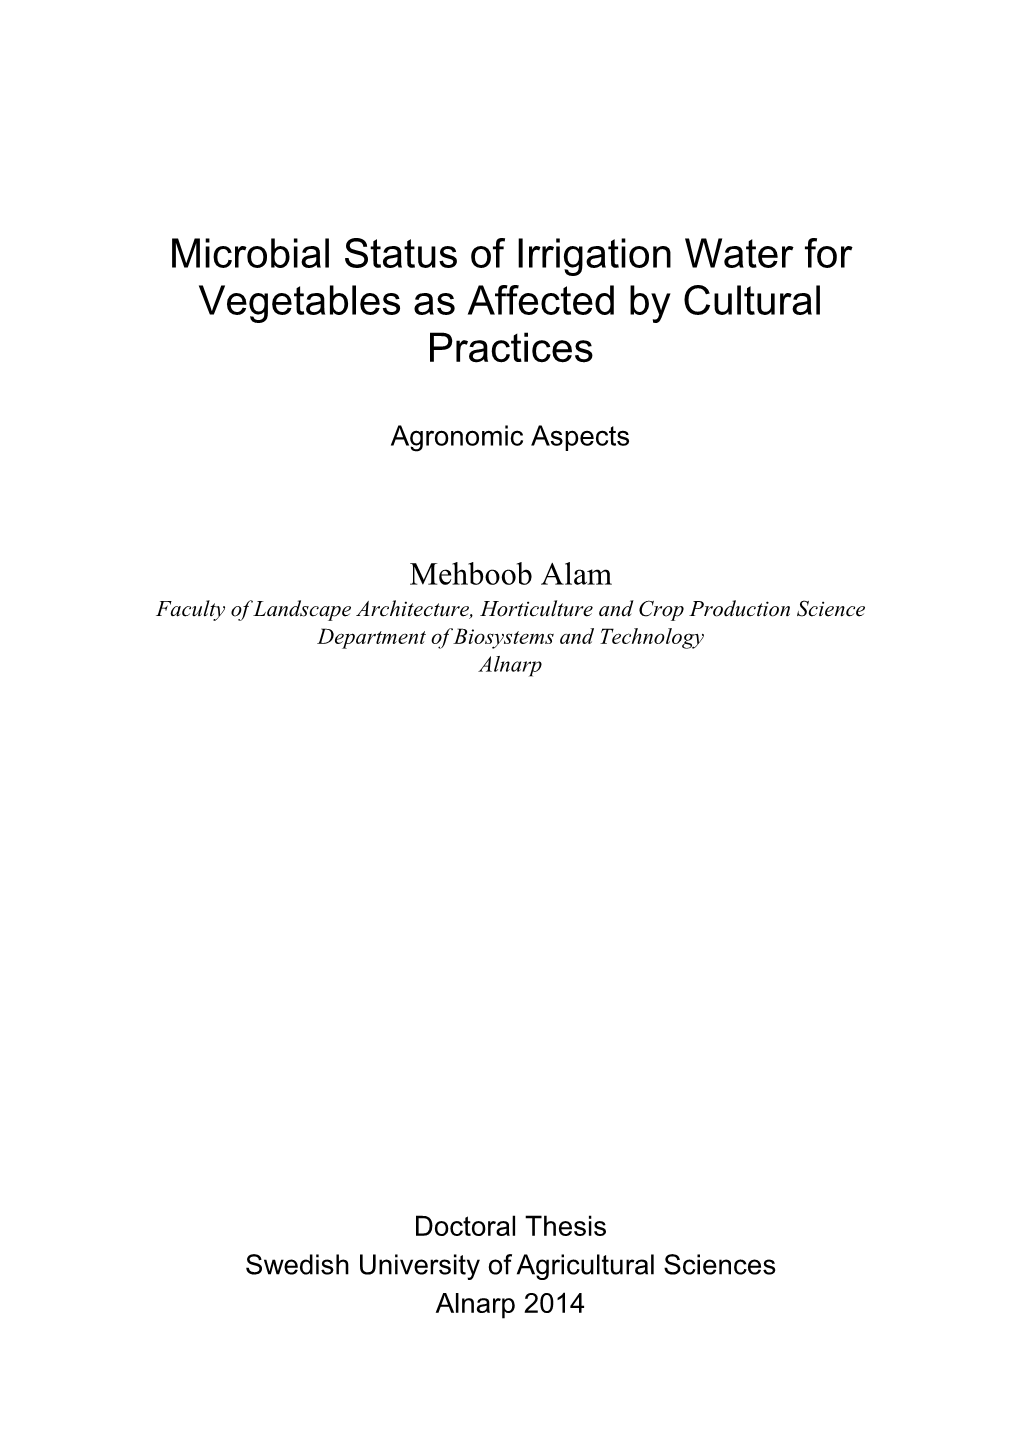 Microbial Status of Irrigation Water for Vegetables As Affected by Cultural Practices